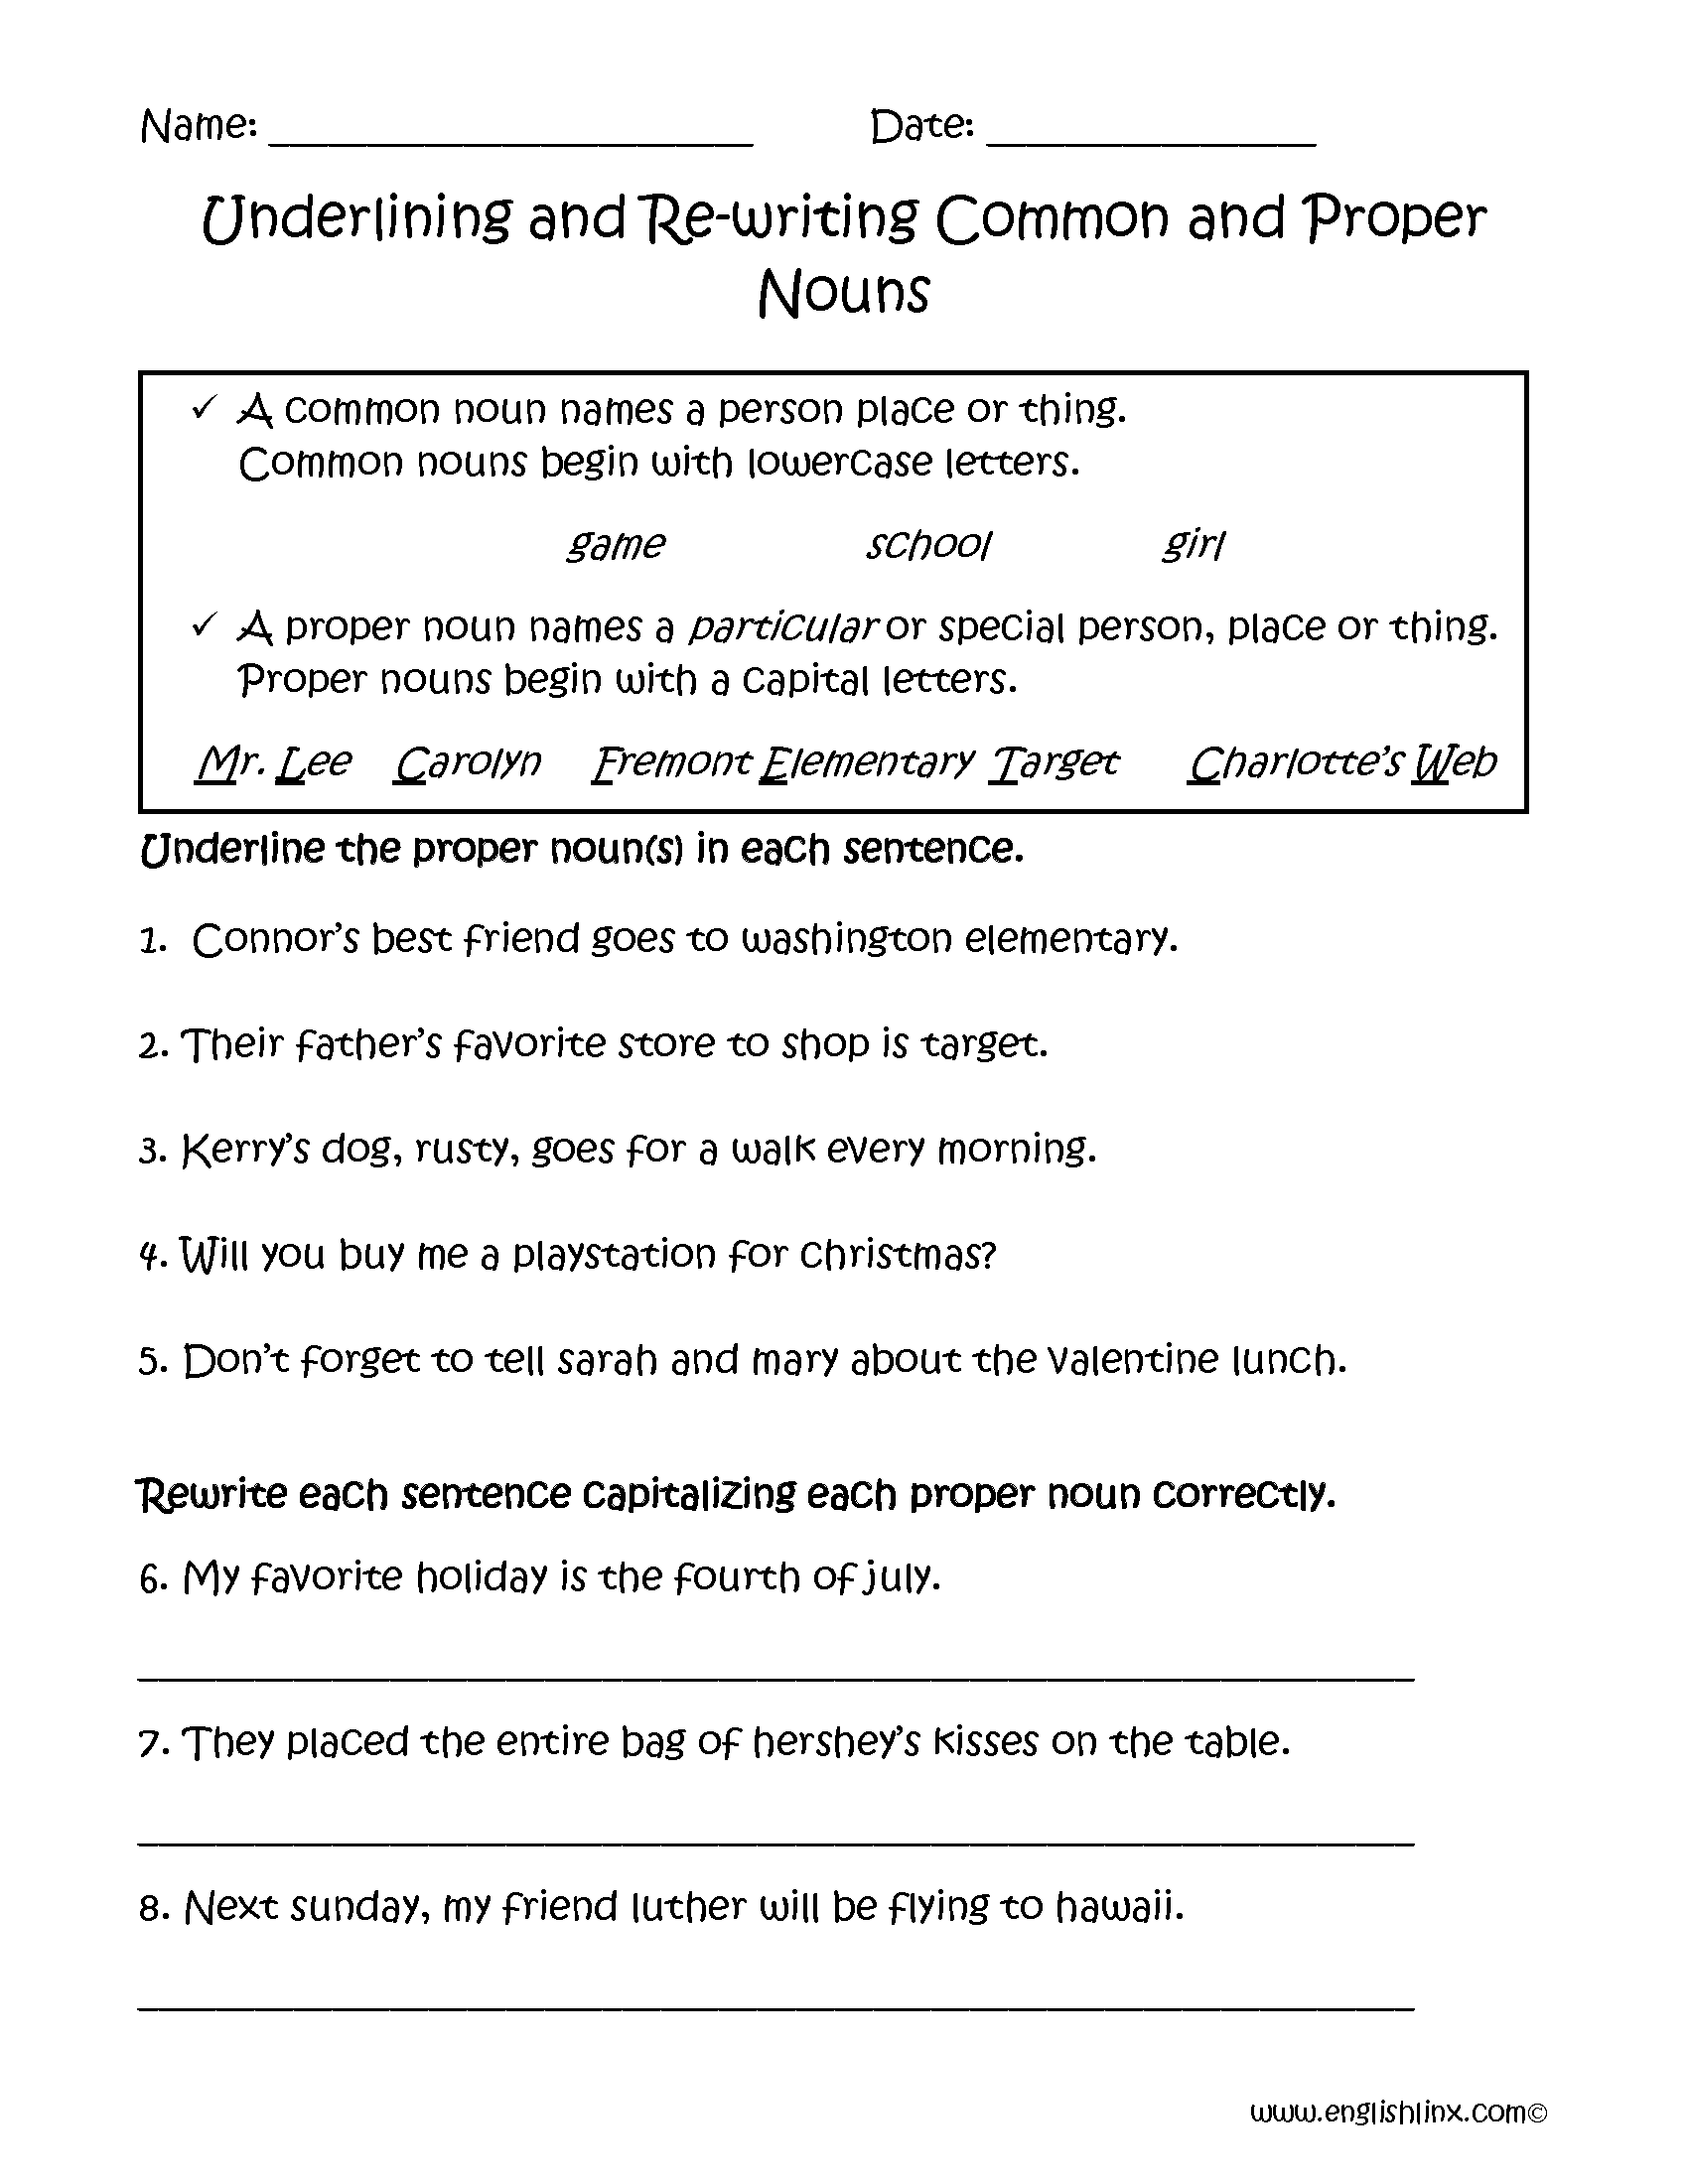 Nouns Worksheets Proper And Common Nouns Worksheets Common And